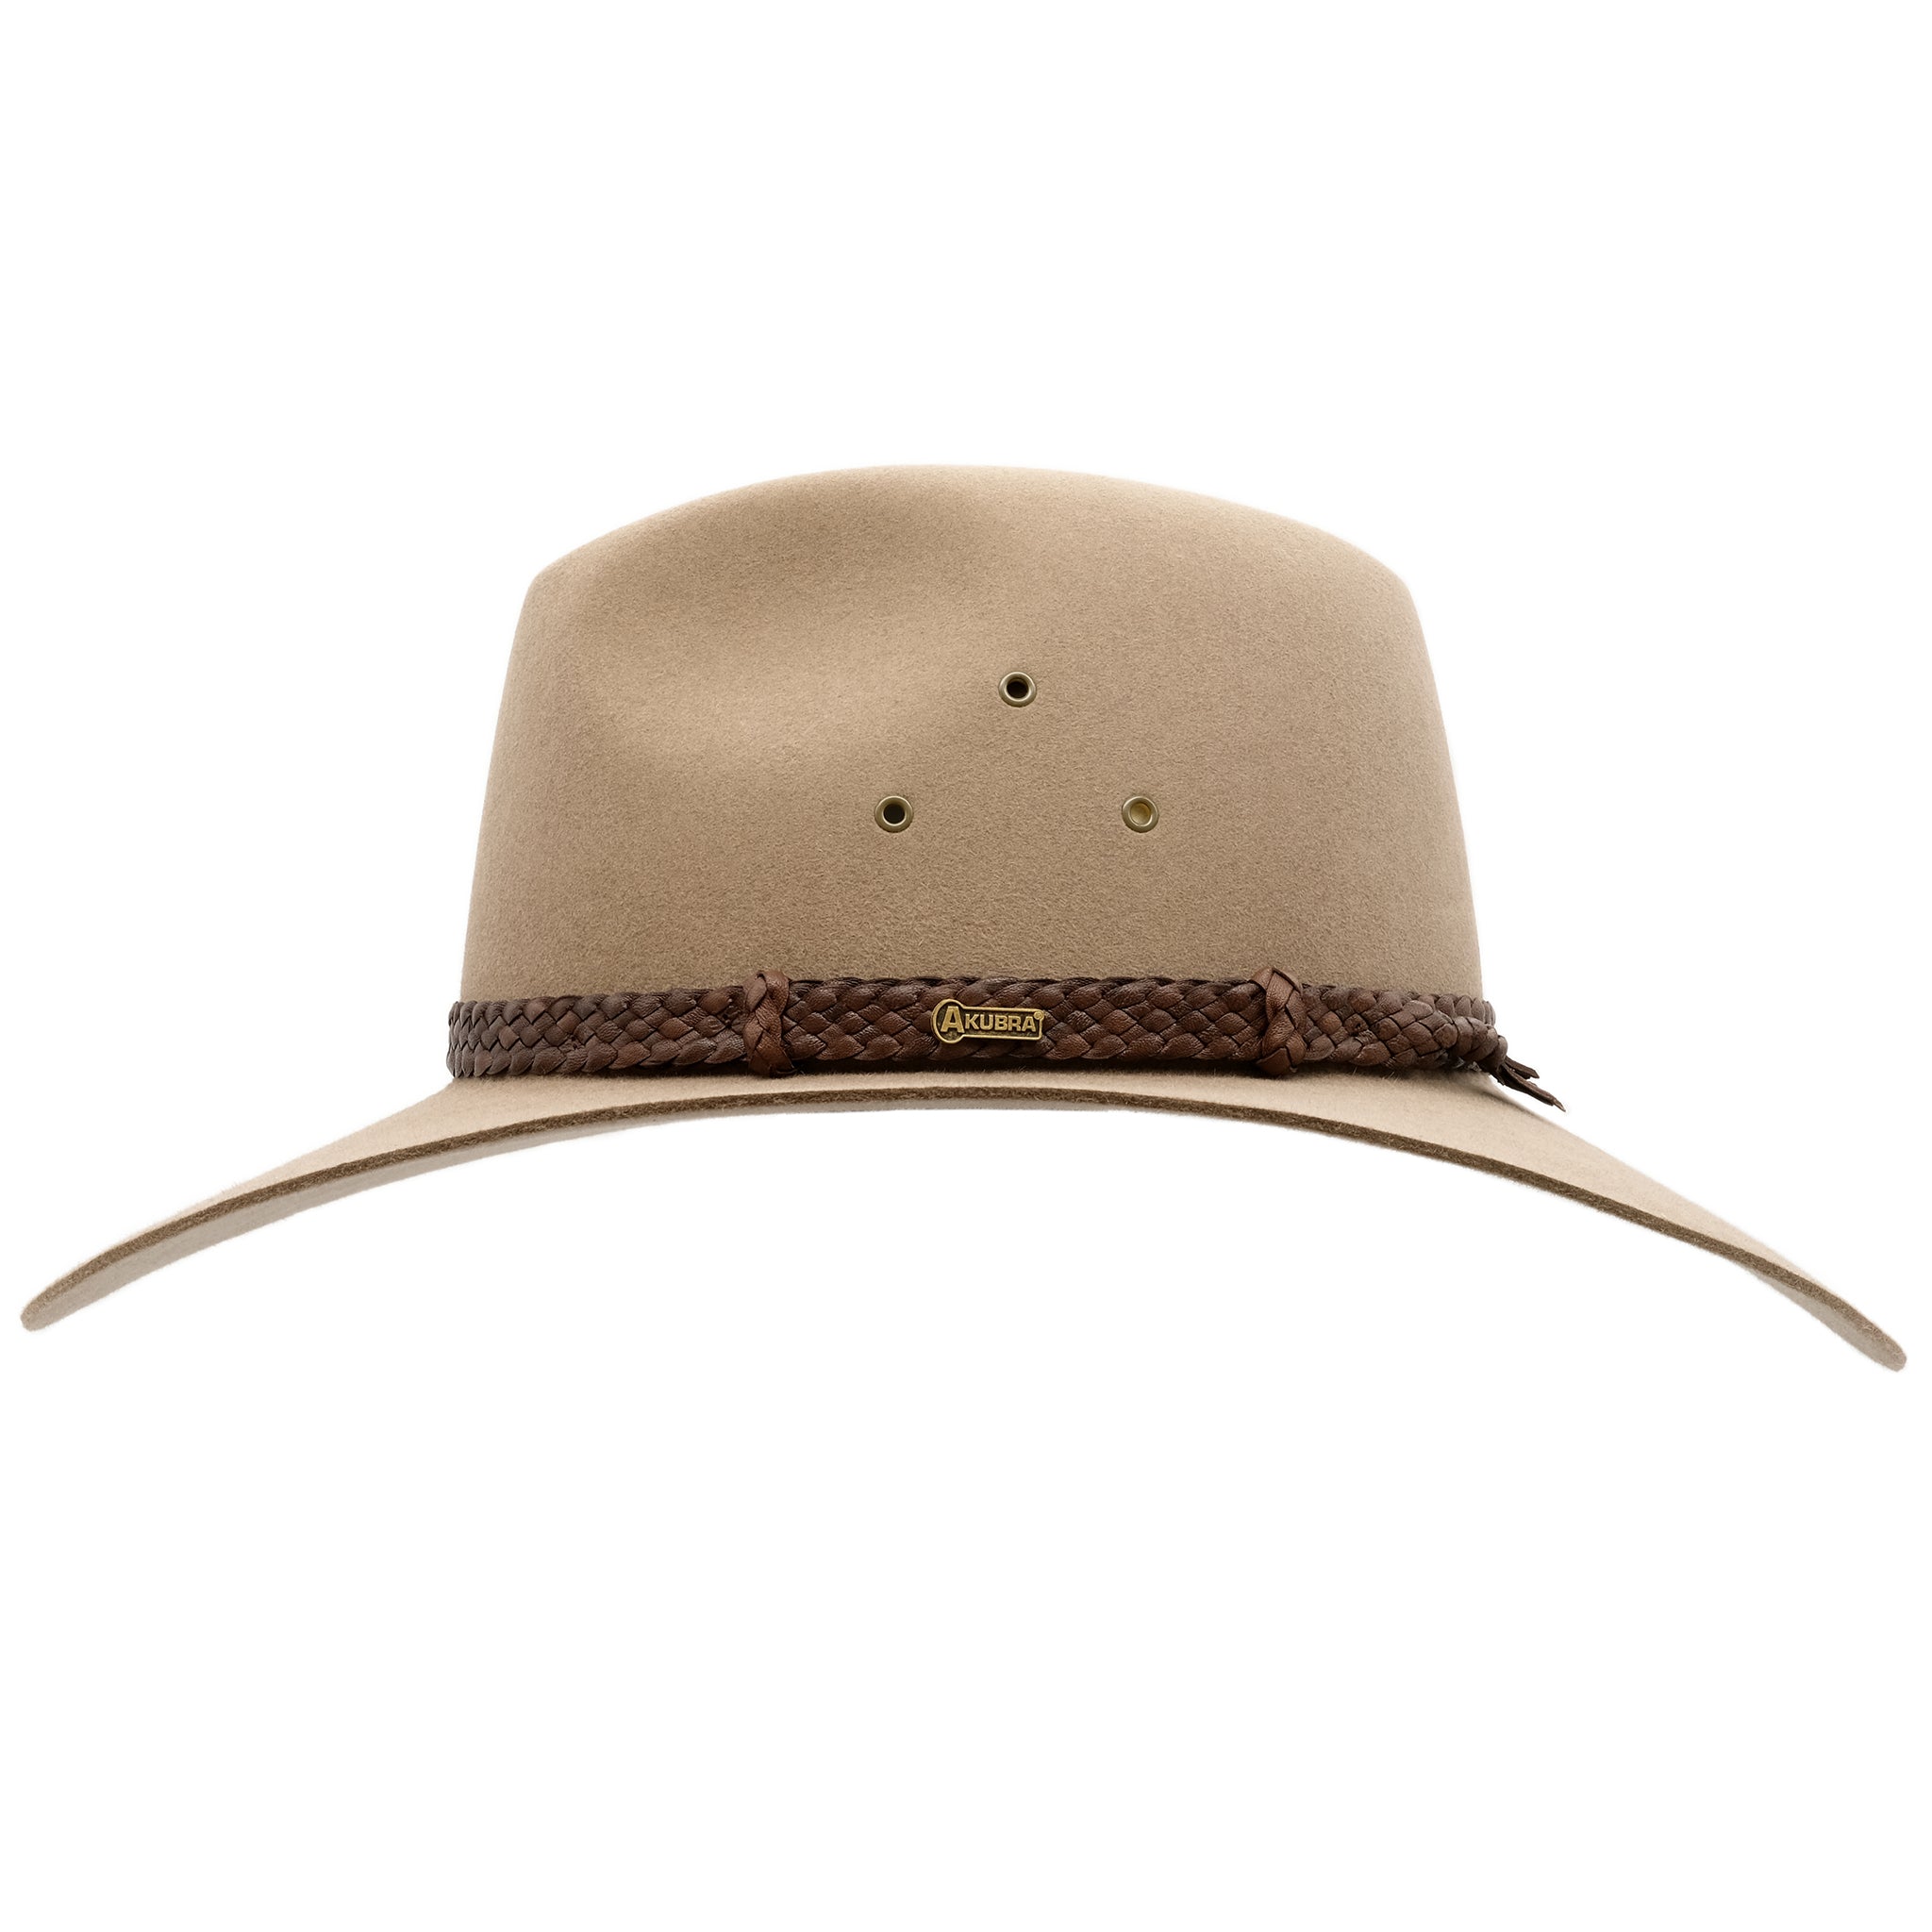 side view of the Akubra Riverina Hat in Bran colour